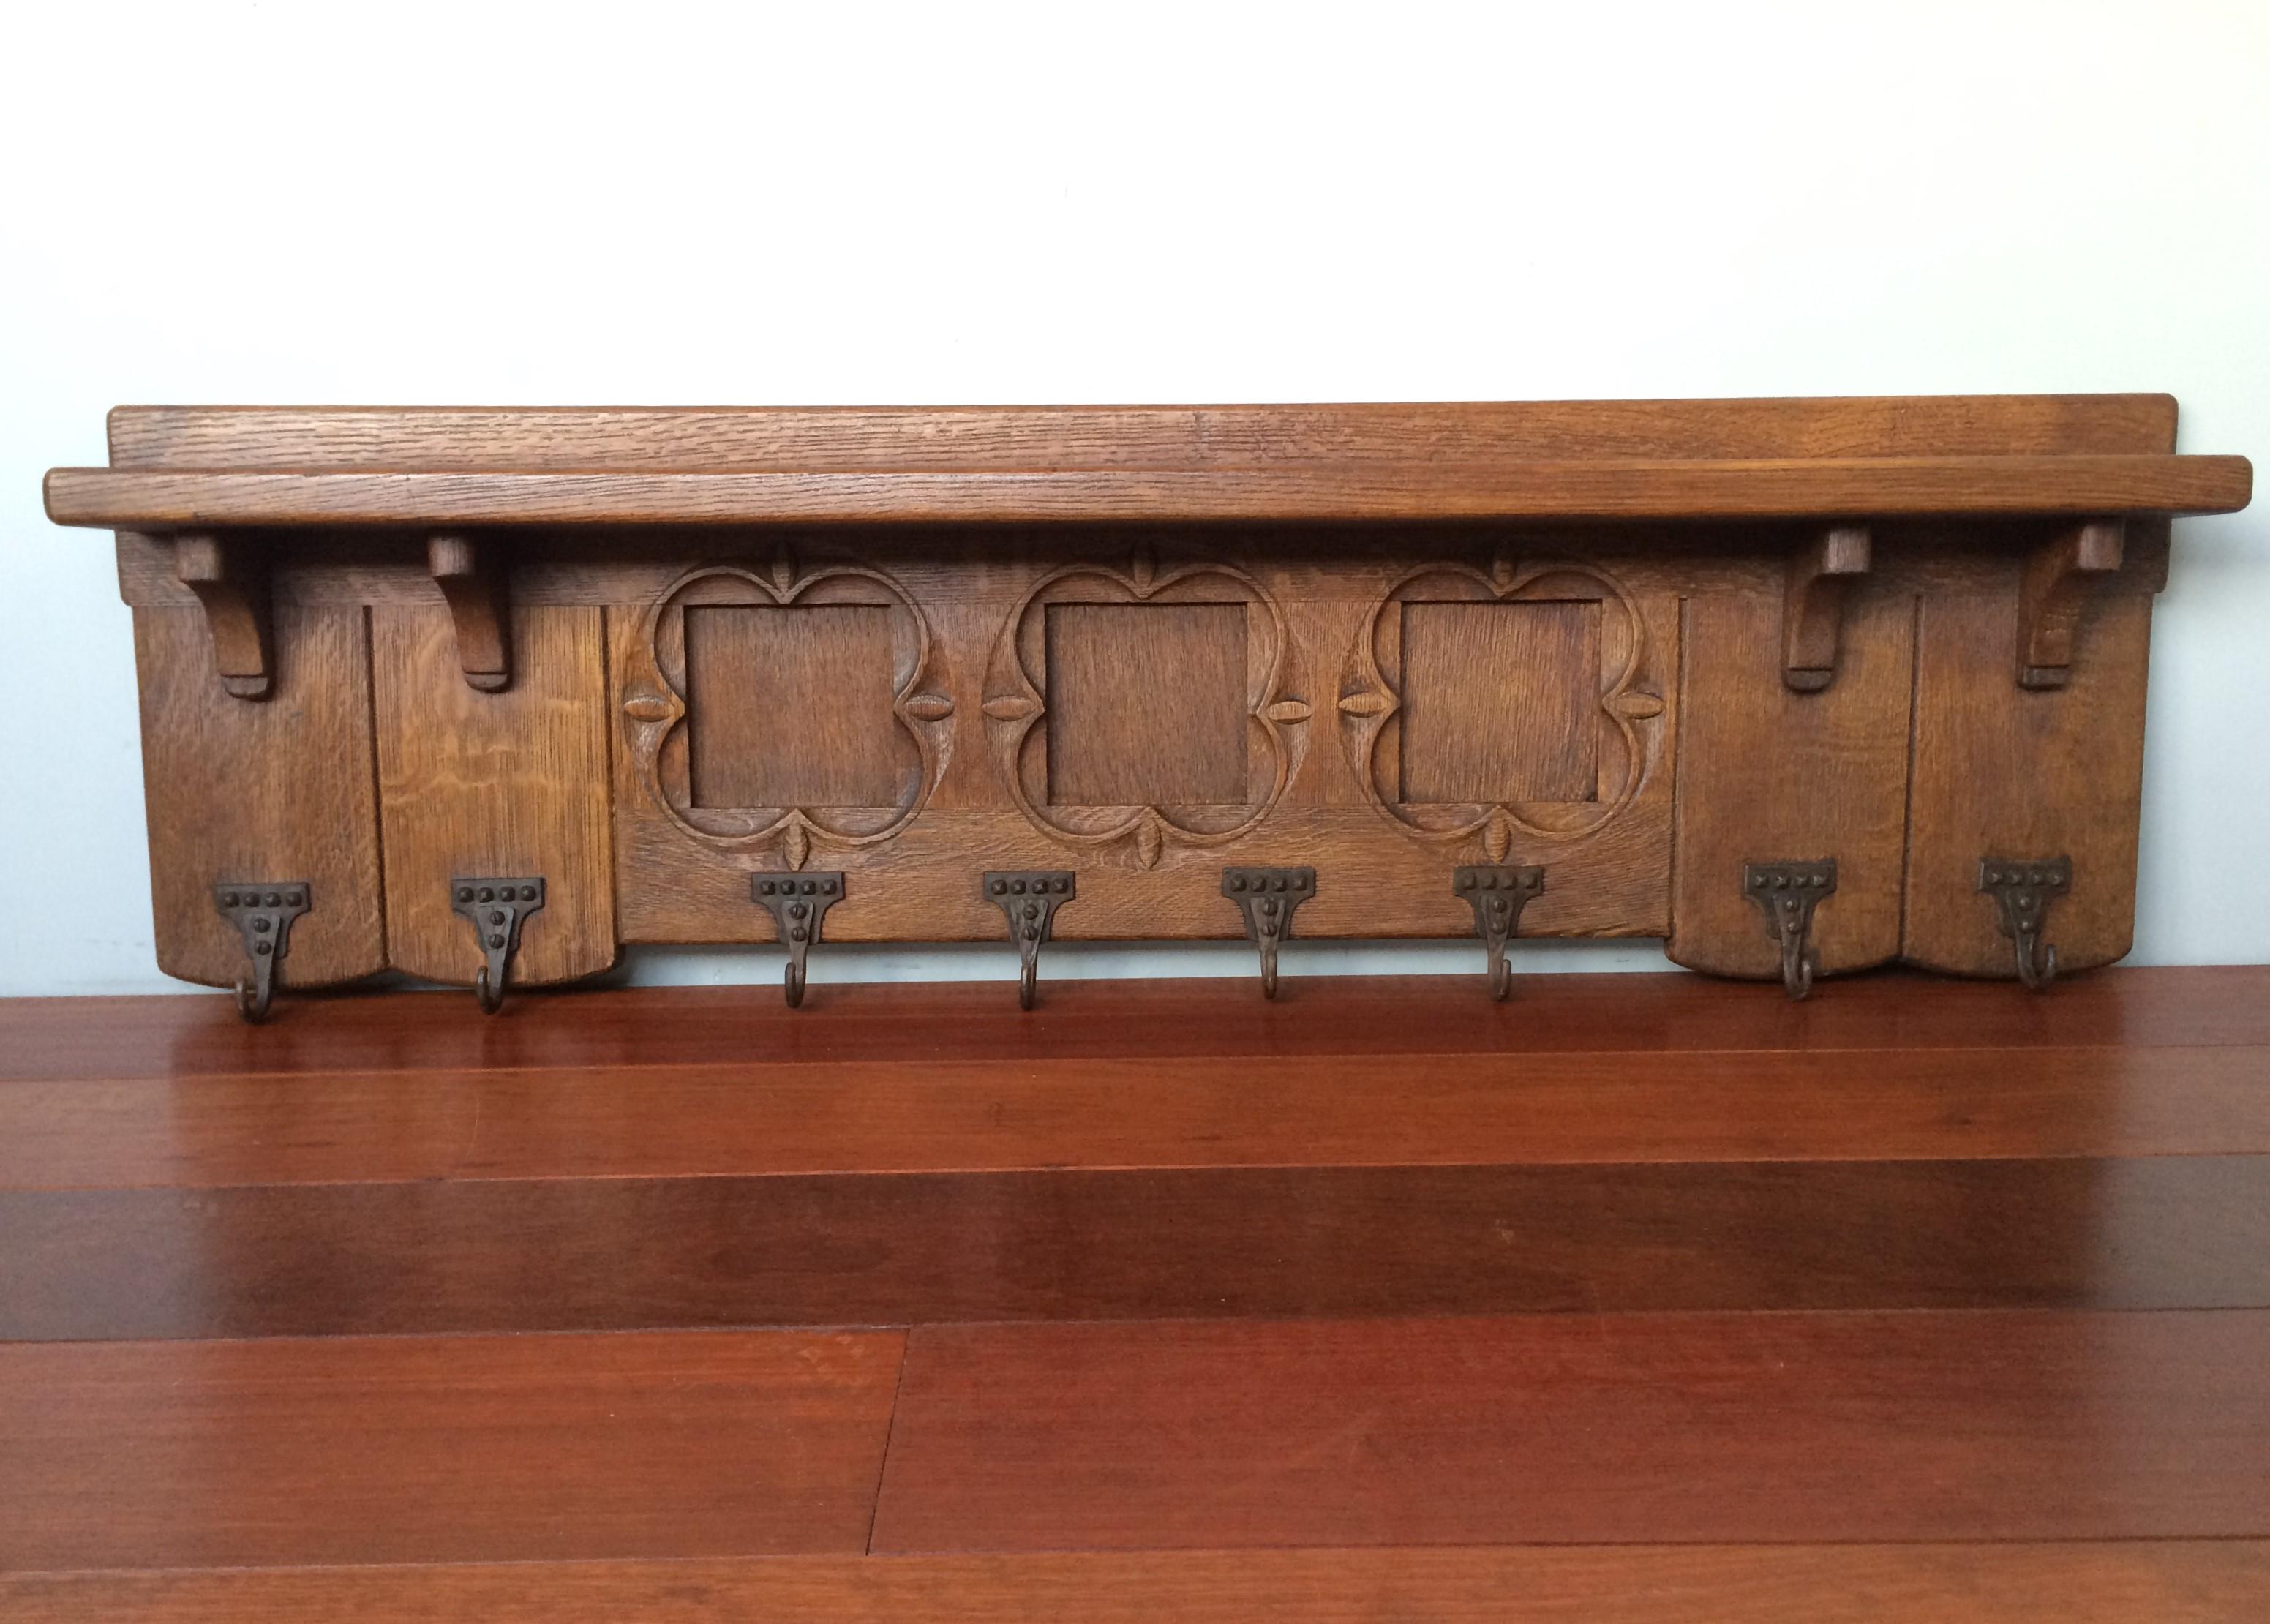 Large size, superb condition, wonderful craftsmanship, solid oak Gothic Revival wall coat rack.

Anyone who has ever visited a Gothic church or another Gothic style building will immediately recognize the perfect quatrefoil elements in this wall